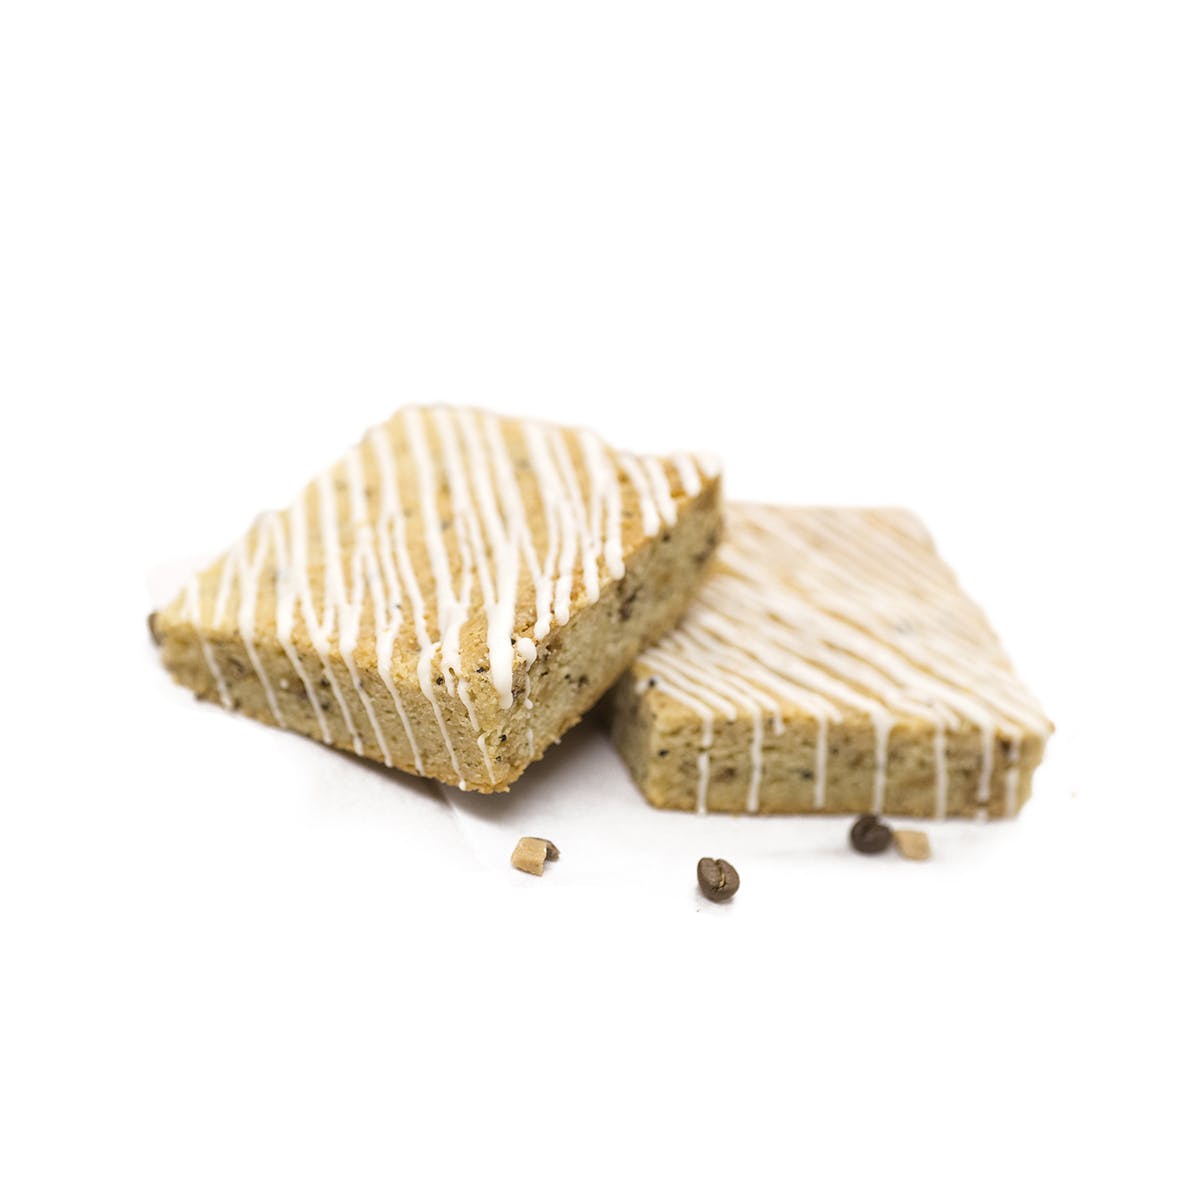 edible-vert-edibles-espresso-toffee-cookie-square-100mg